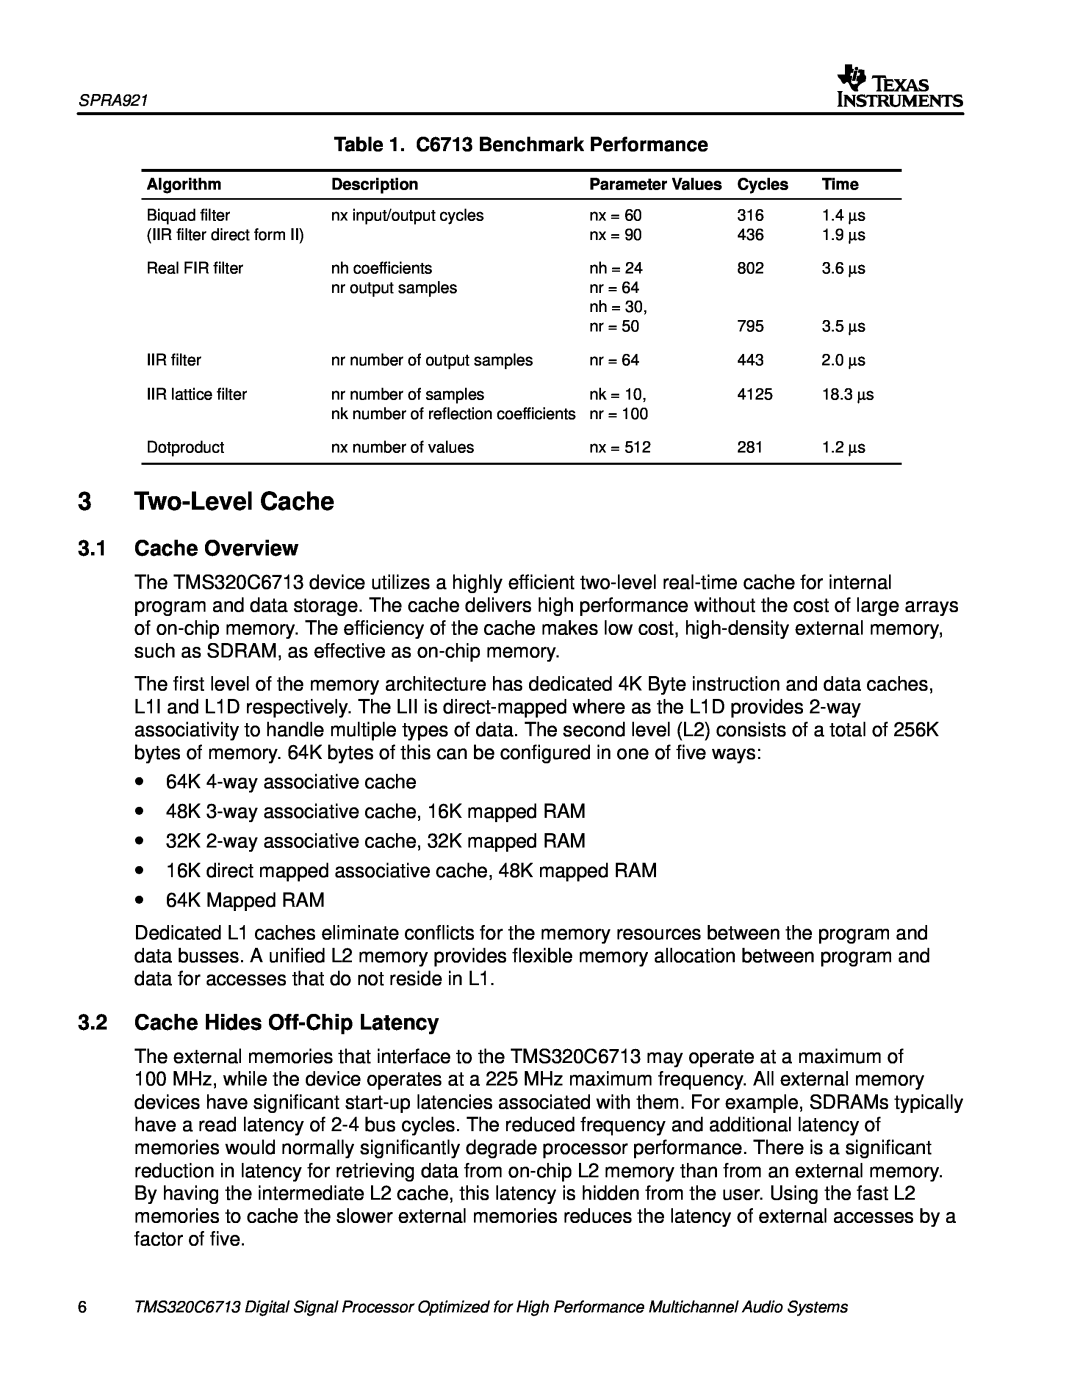 Philips TMS320C6713 manual Two-Level Cache, Cache Overview, Cache Hides Off-Chip Latency, C6713 Benchmark Performance 